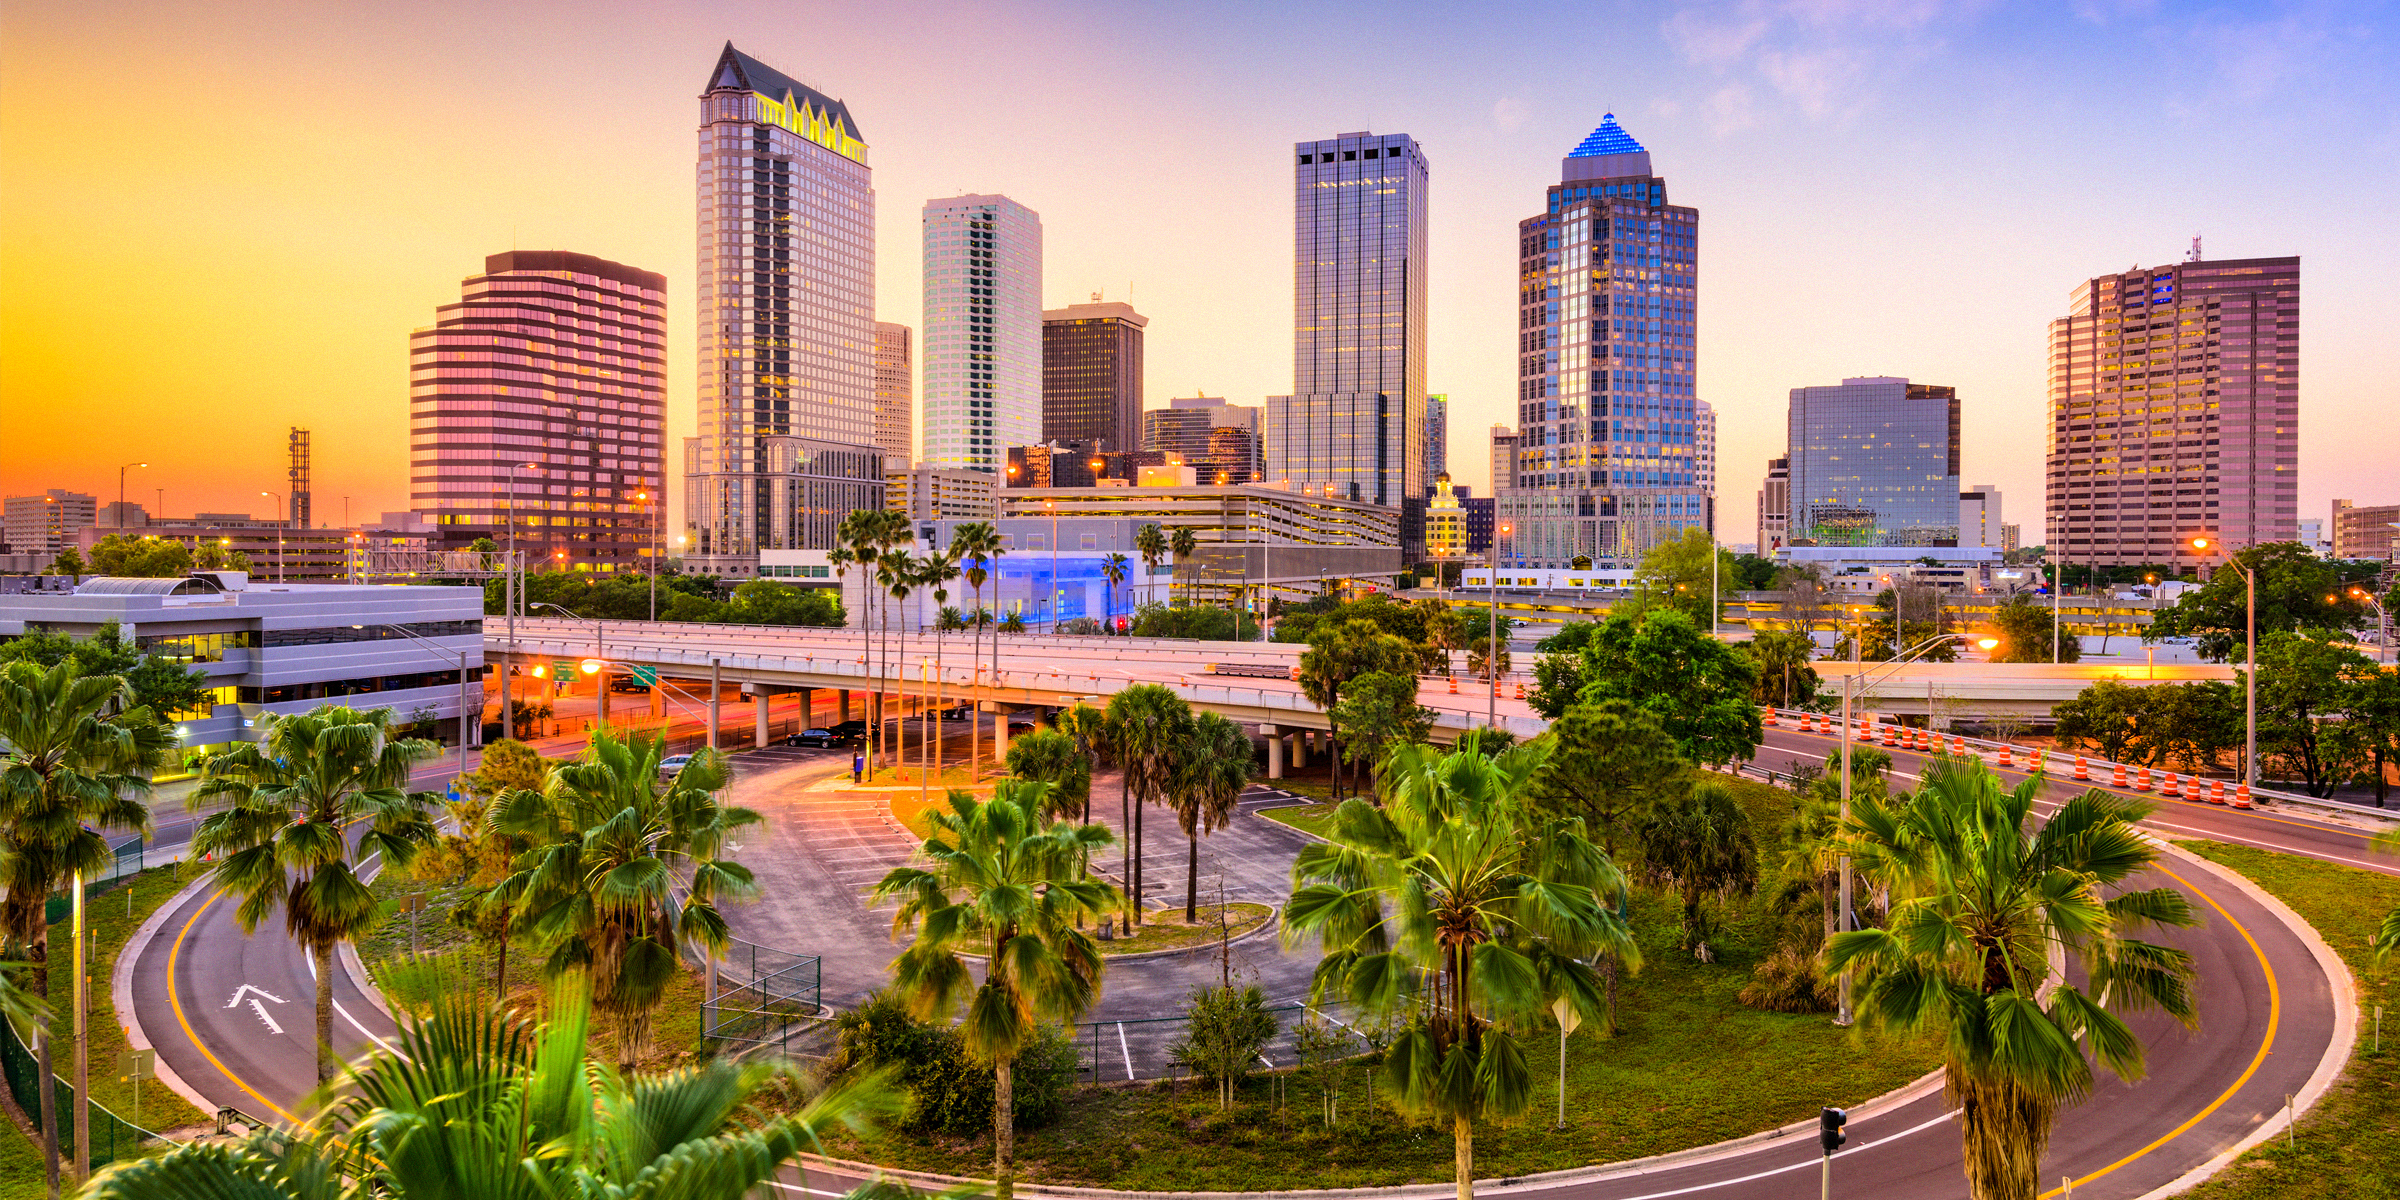 A city in Florida | Source: Shutterstock